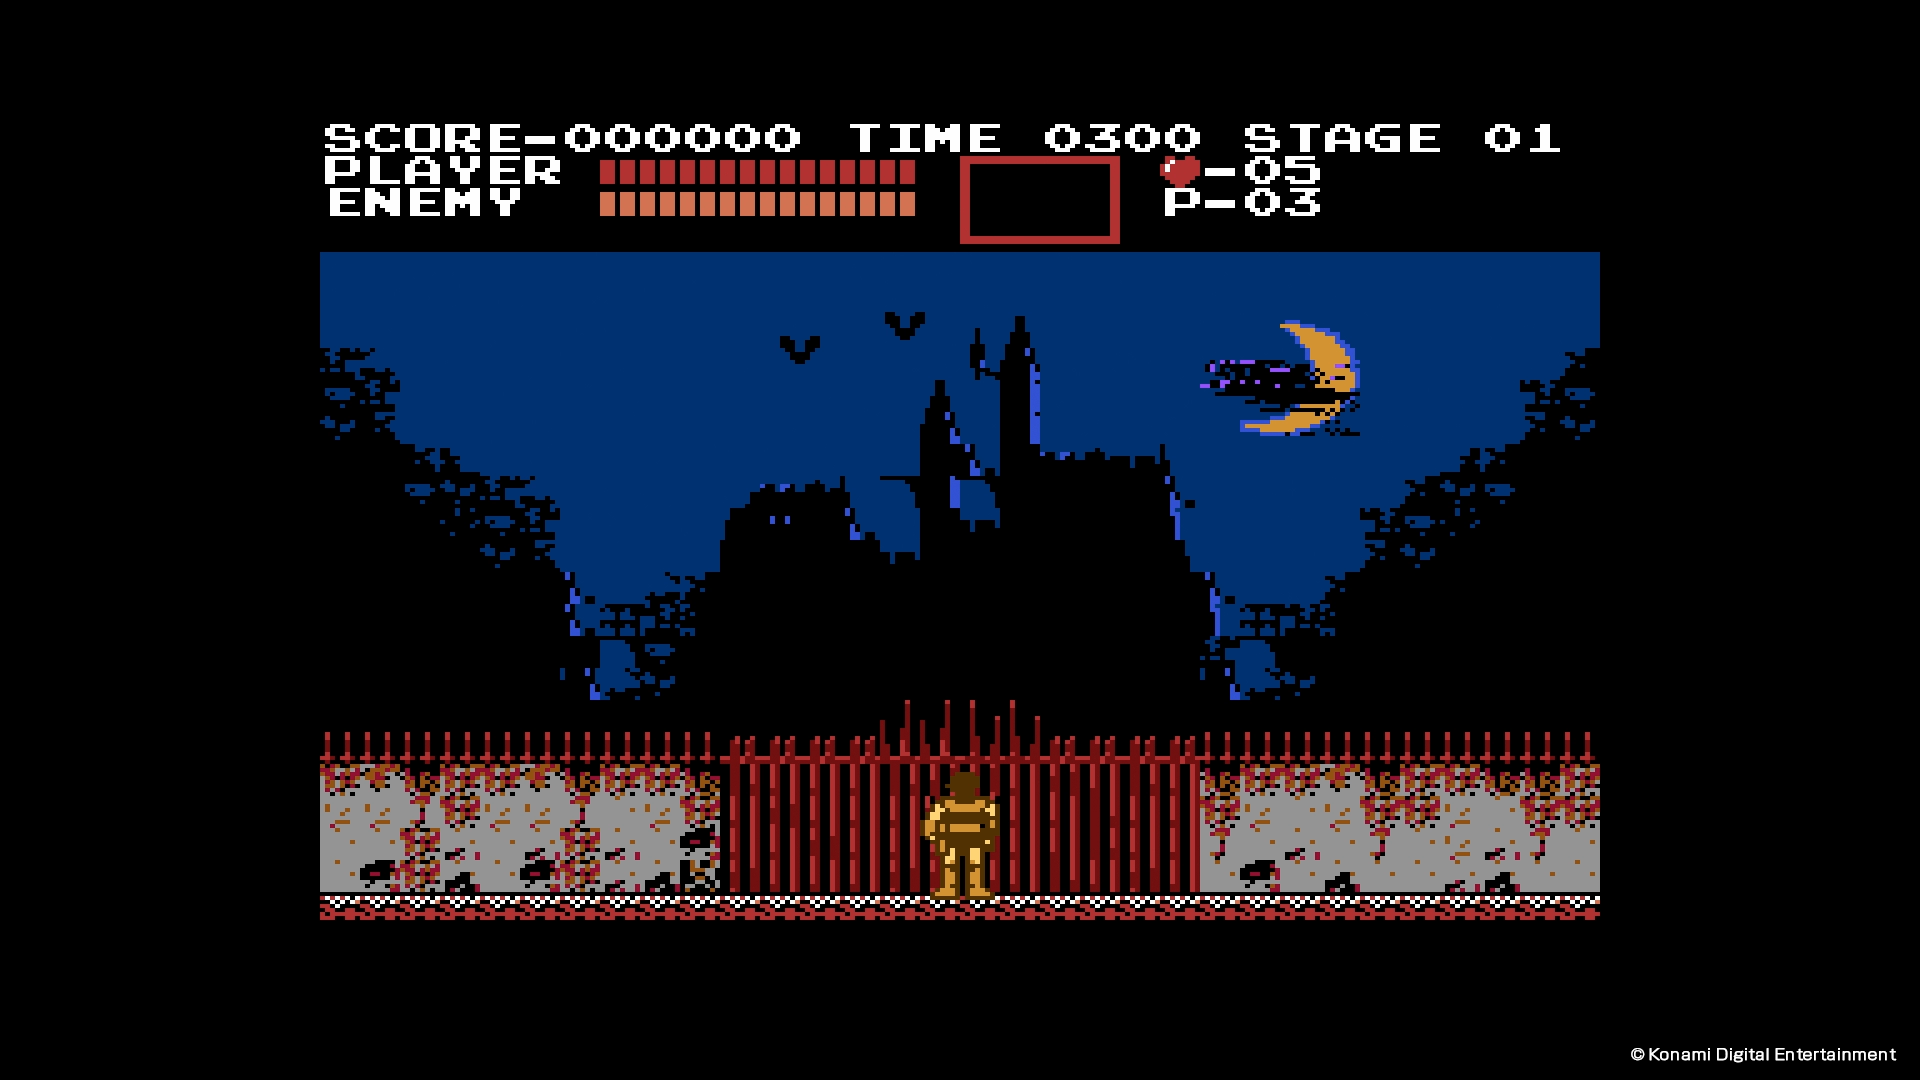 Castlevania collection image